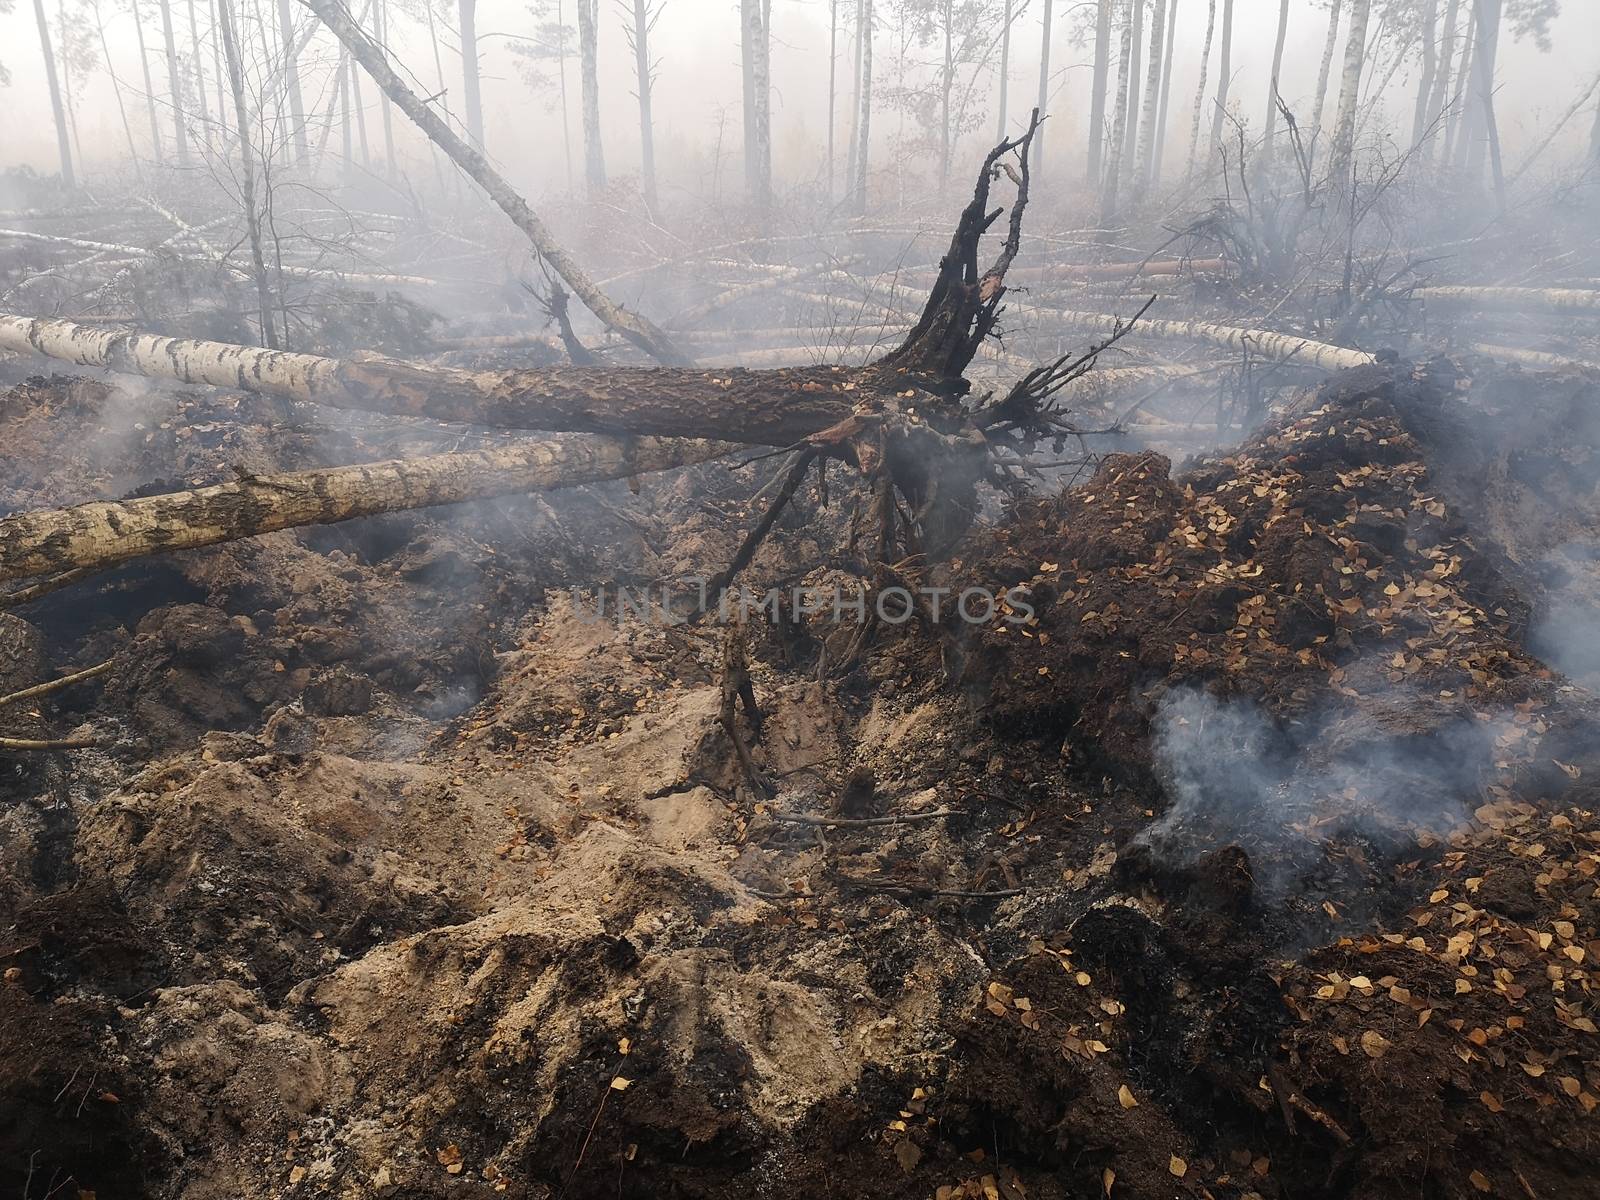 Peatlands are on fire. Forest fire and its consequences. Smoke black earth burnt. Burnt tree trunks and ashes. Charred branches.